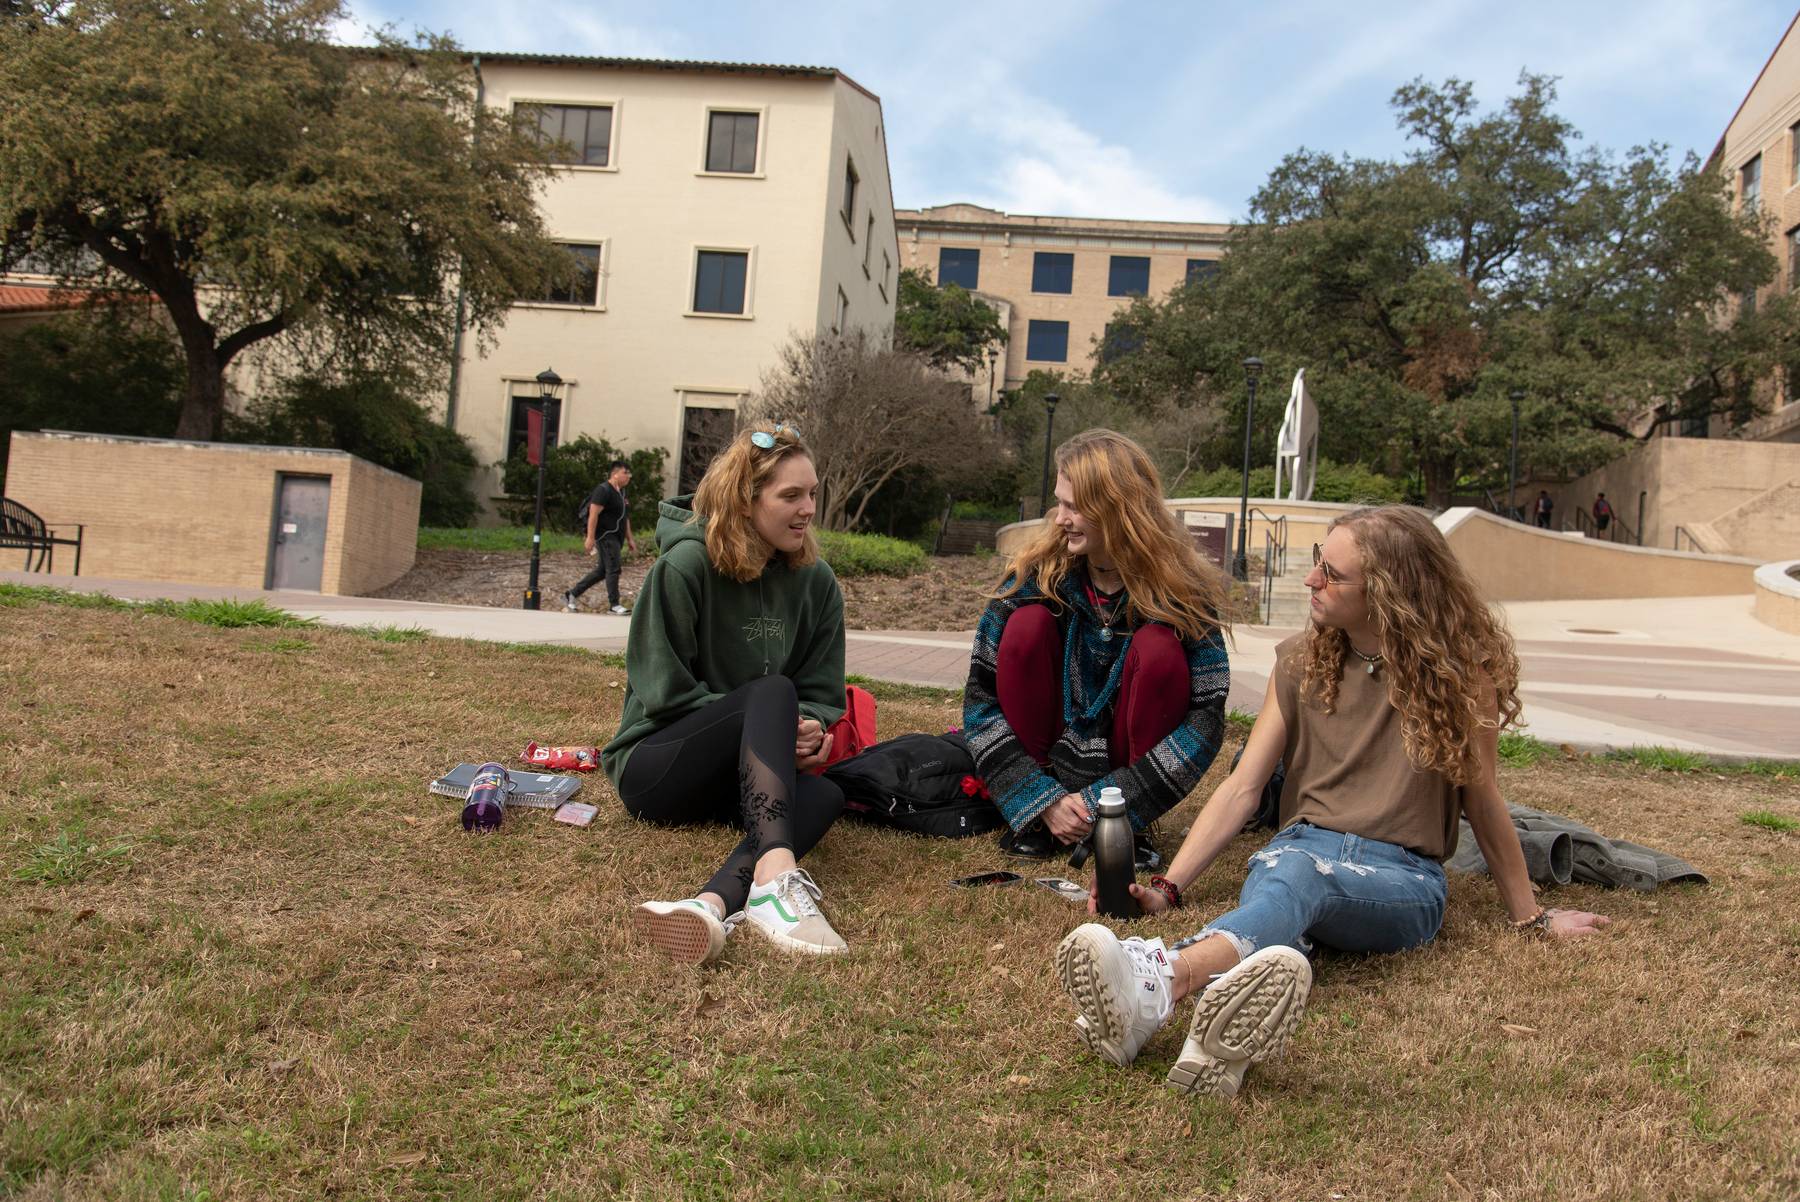 Three students sitting on the grass with blankets near east campus of Texas State University.